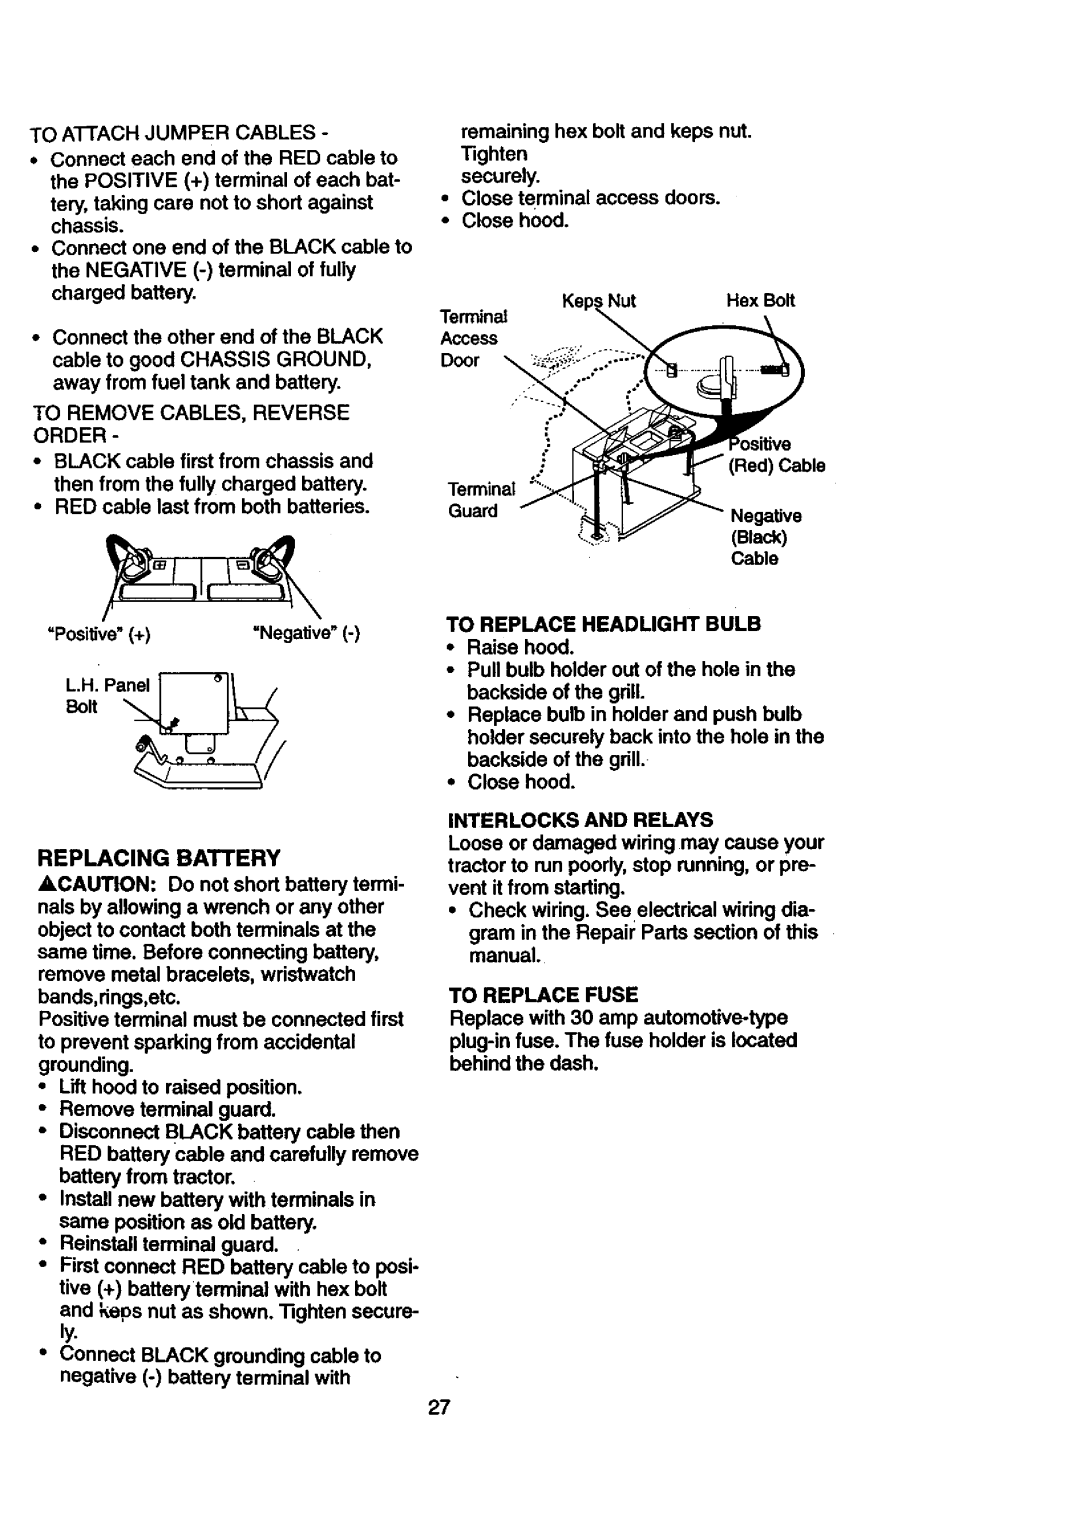 Craftsman 917.27084 manual To Remove Cables, Reverse Order, •RED cable last from both batteries 